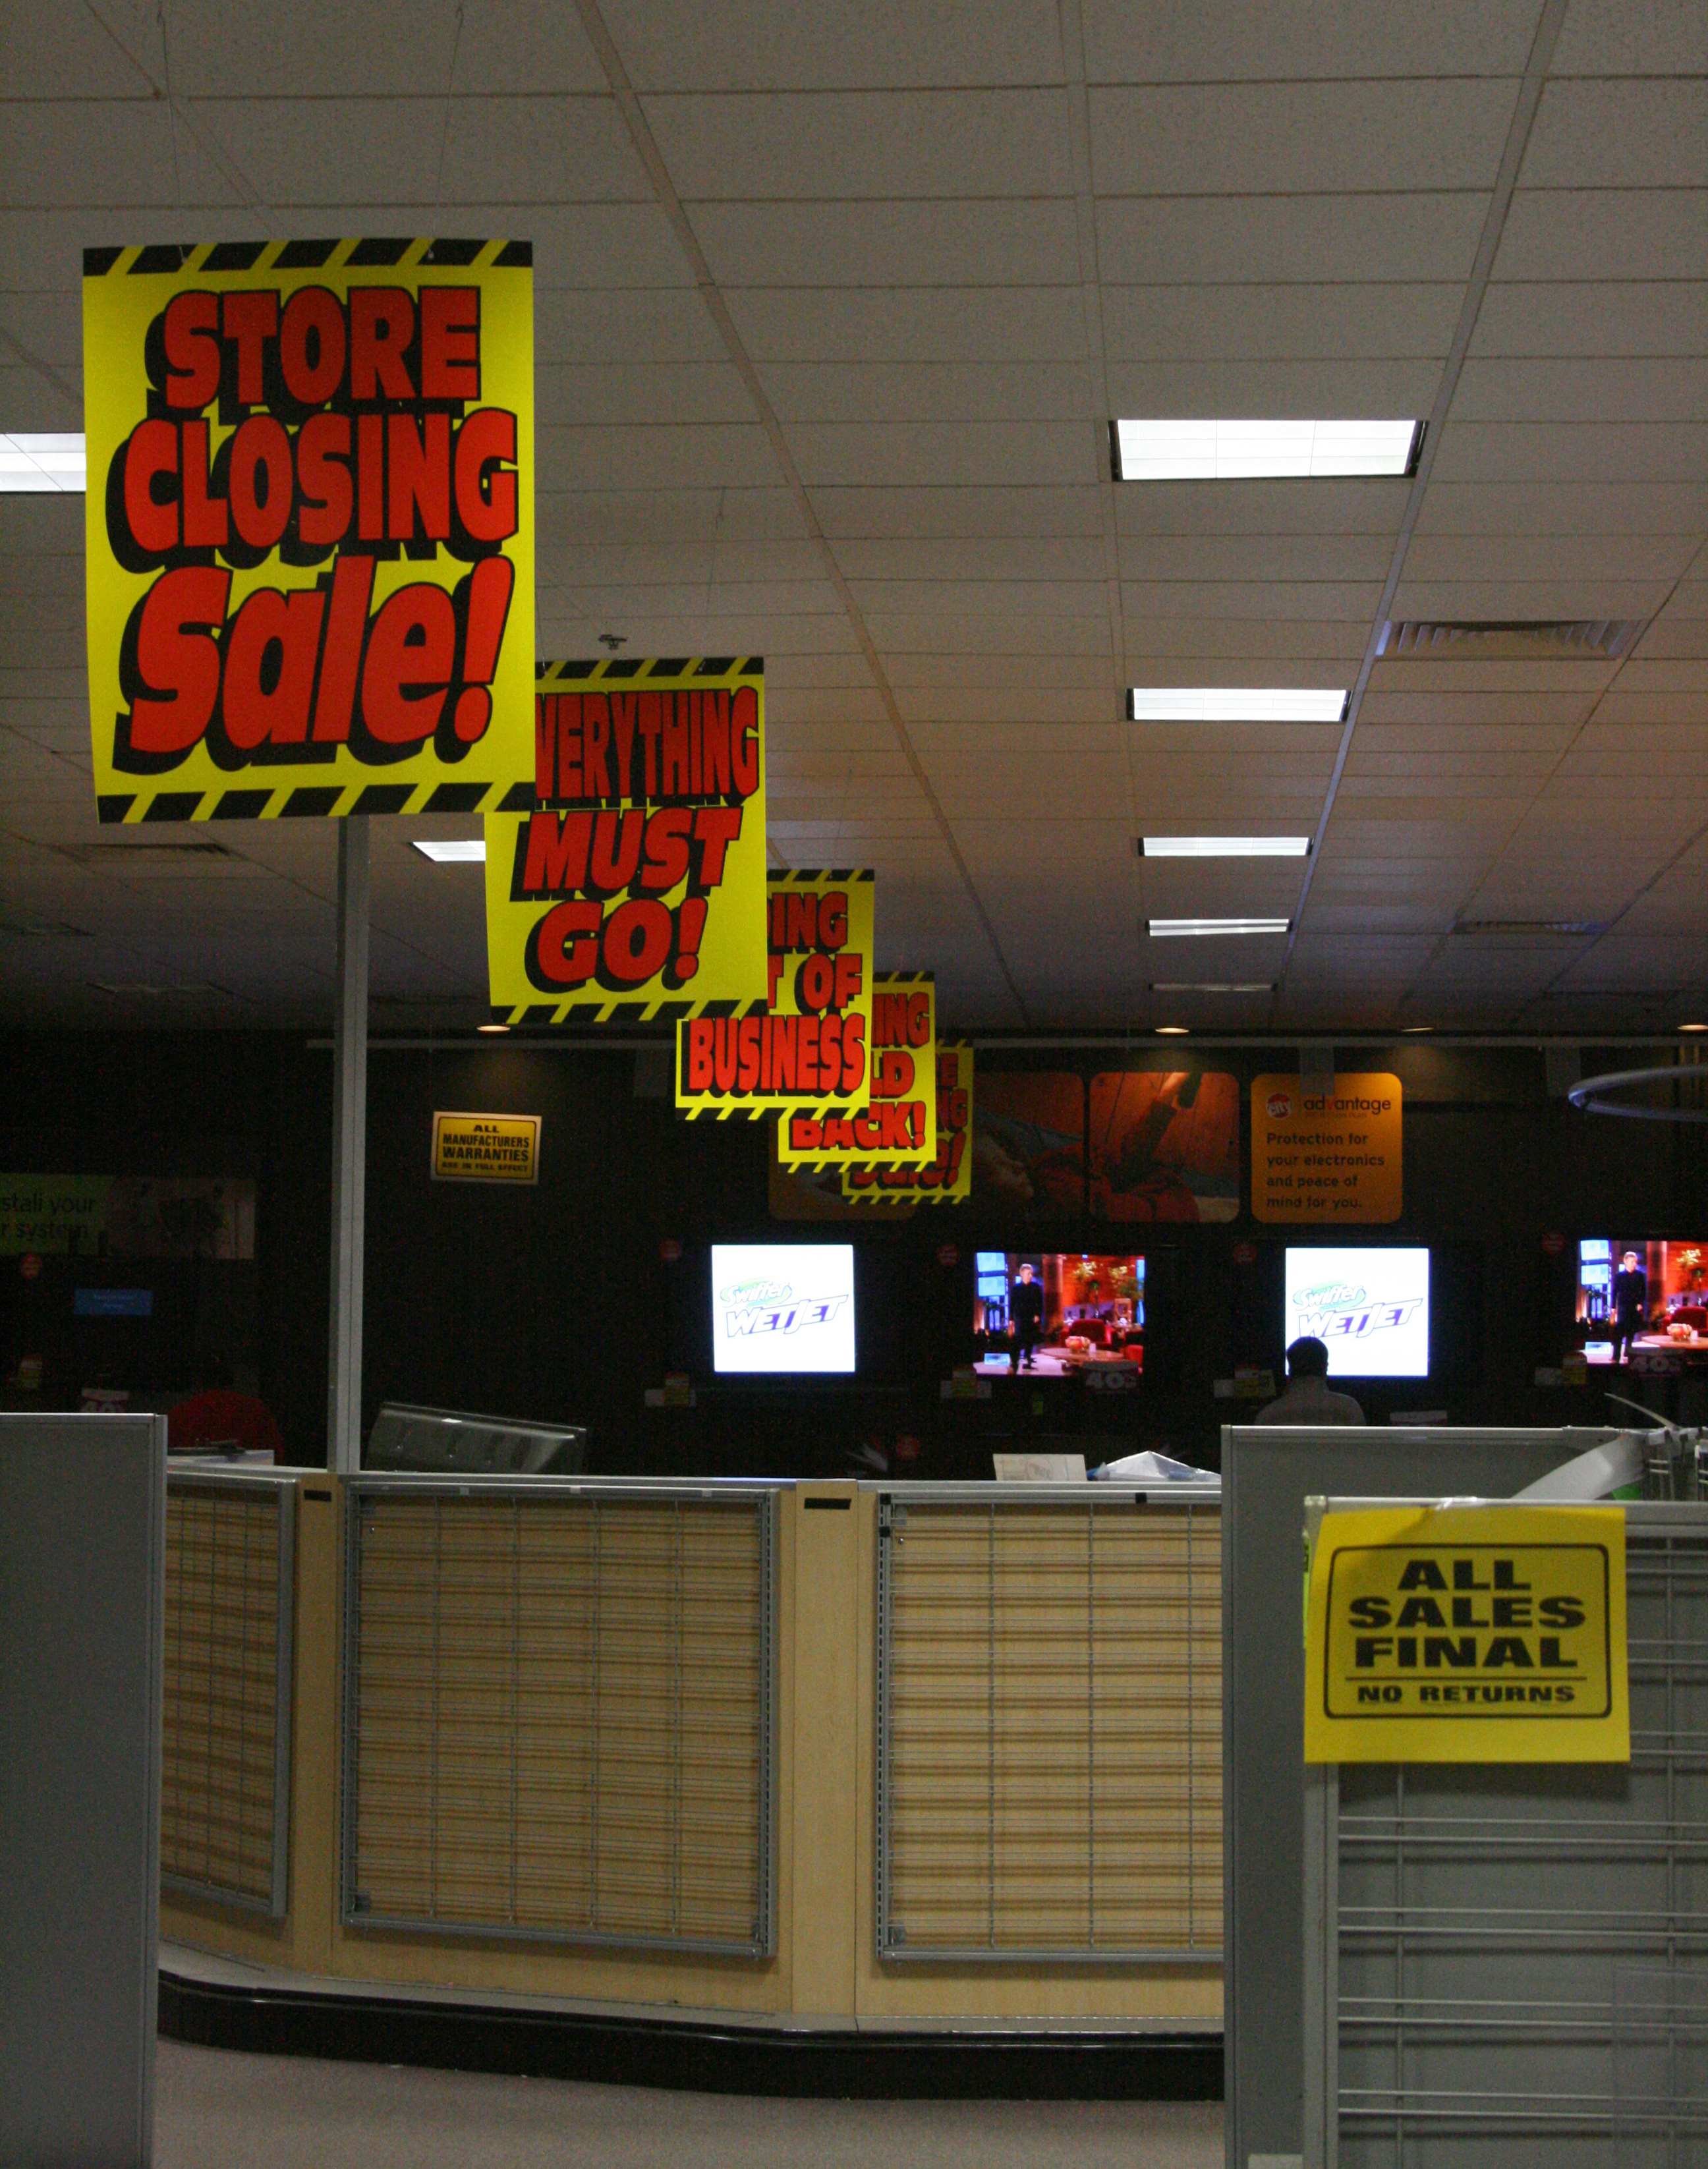 2009 02 26_Circuit_City_store_closing_everything_must_go